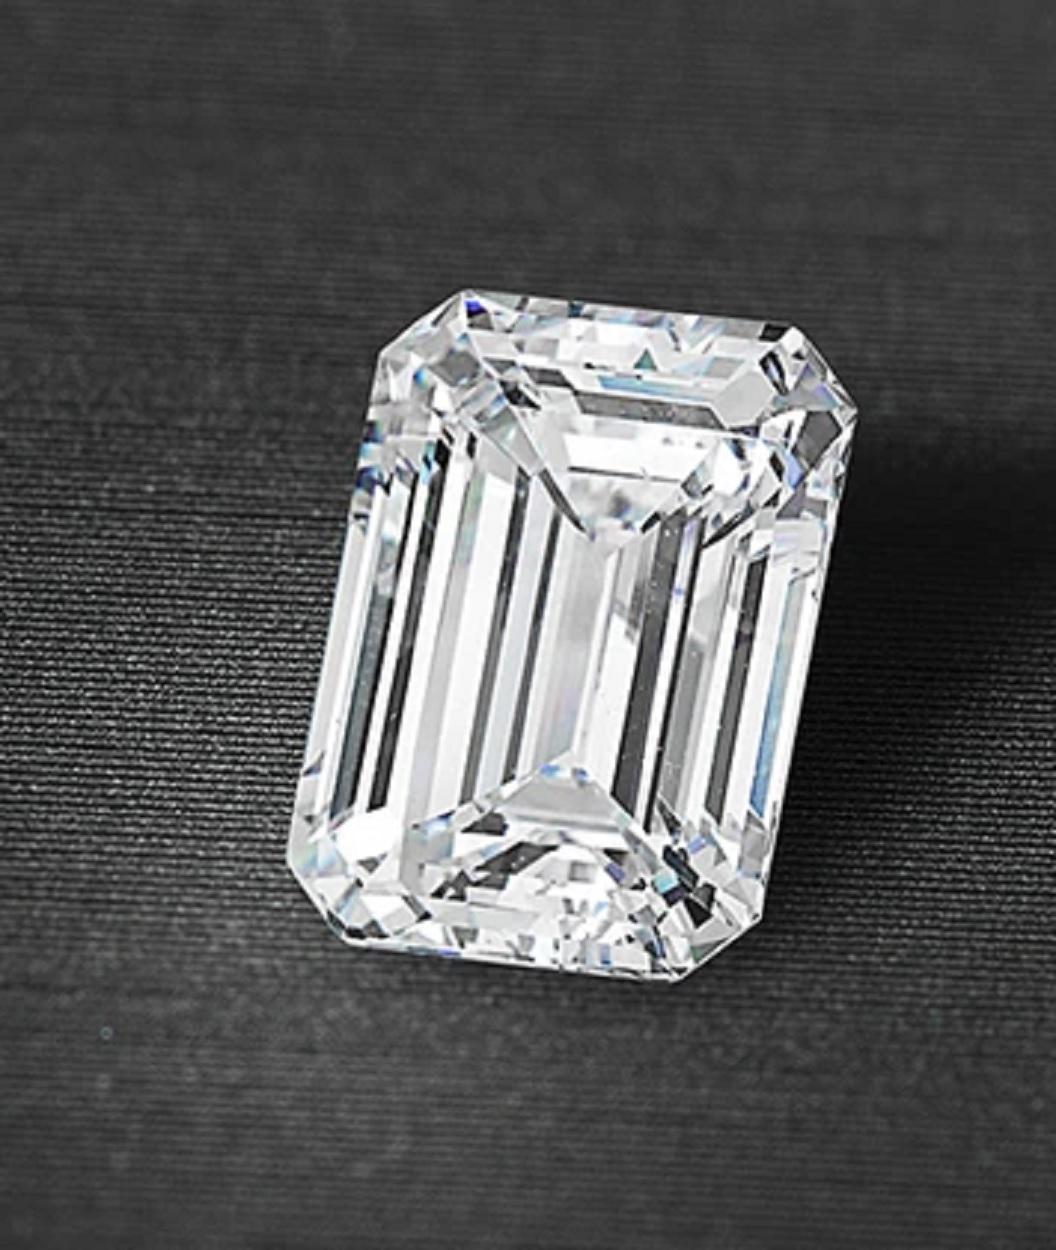 A magnificent diamond 10.01 carat! The diamond has been certified by IGI ANTWERP color is H clarity is VS2 
One of a kind a real heirloom piece for your collection.